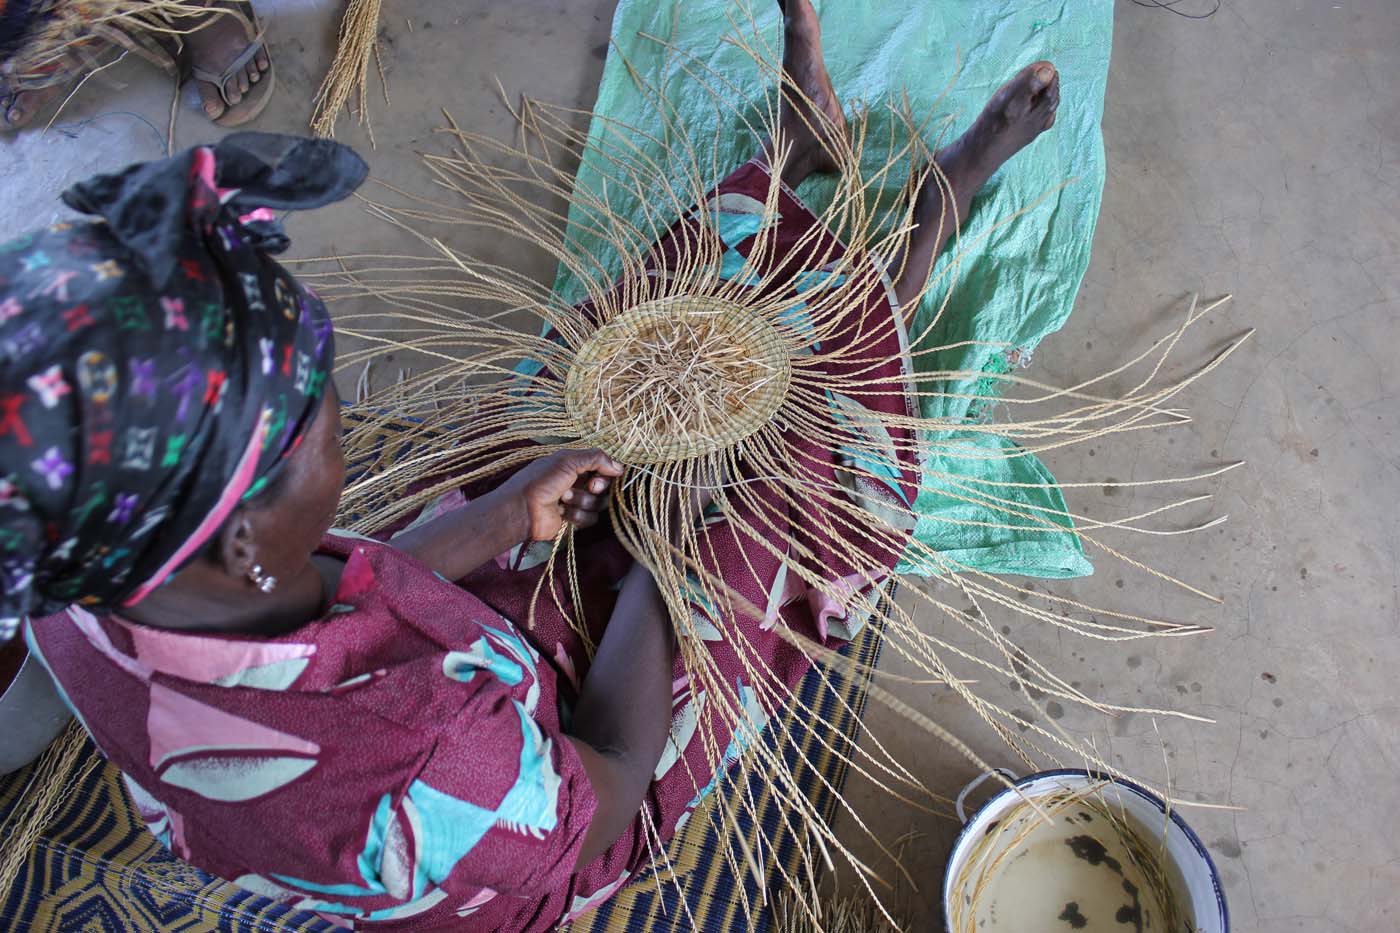 The first weaves form the structure of a basket